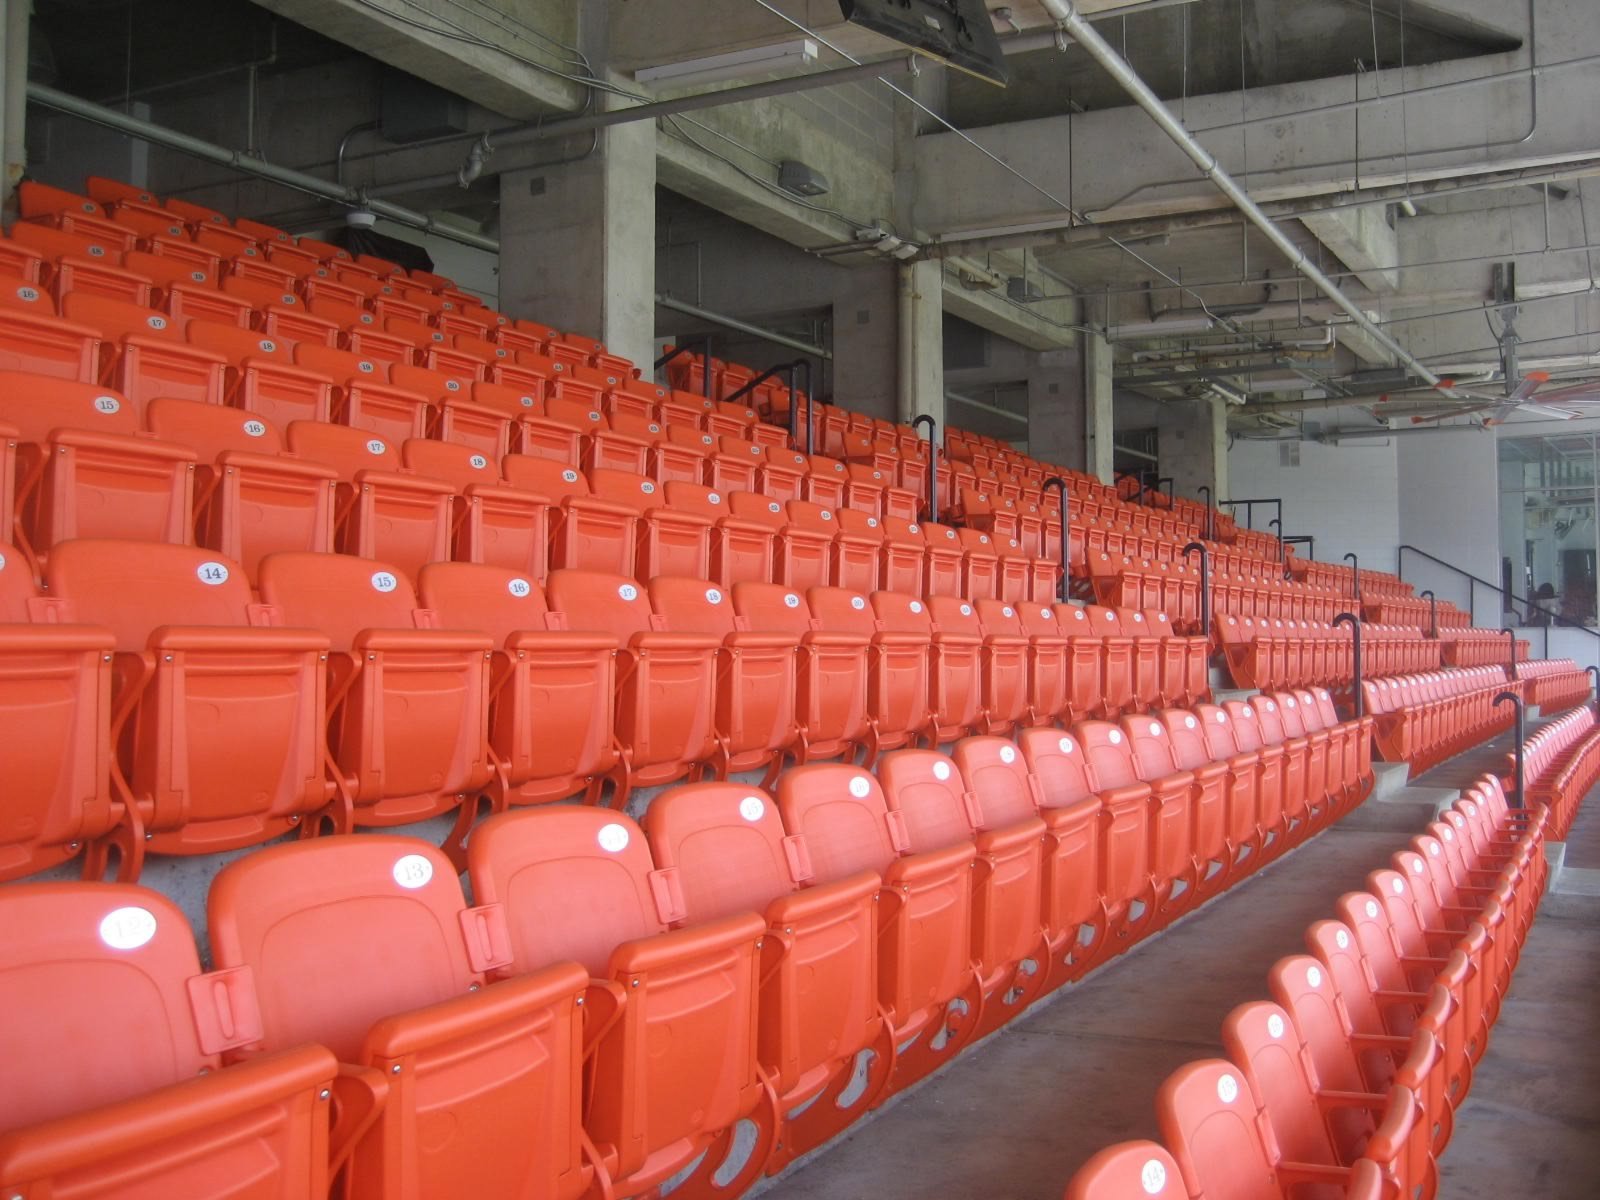 Jordan Hare Seating Chart By Row